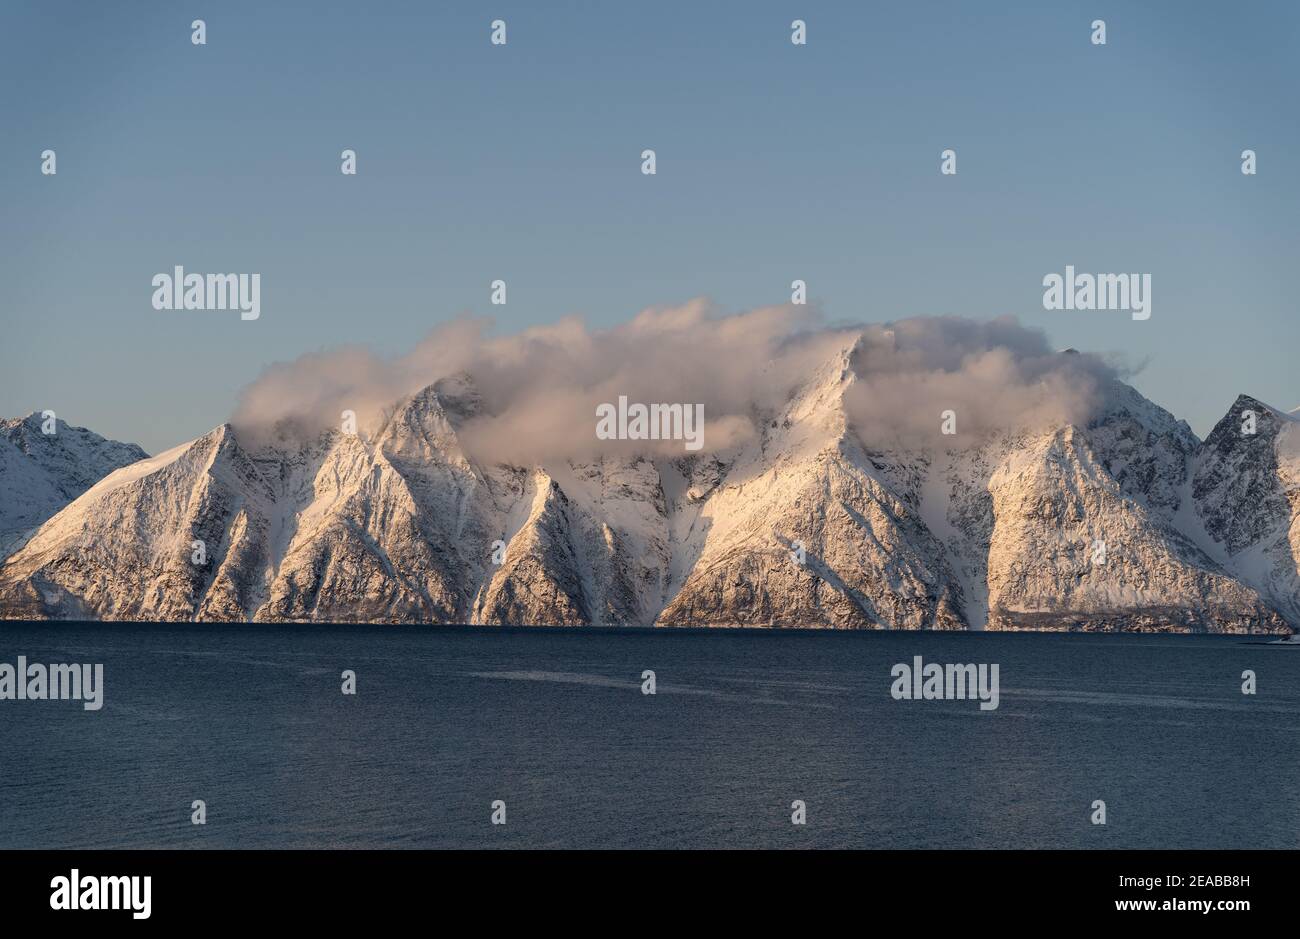 Norway, Nord-Norge, Winter, Mountain, Peaks, Sunset, Sky, Snow, Fjord, Sea, Fjord Stock Photo